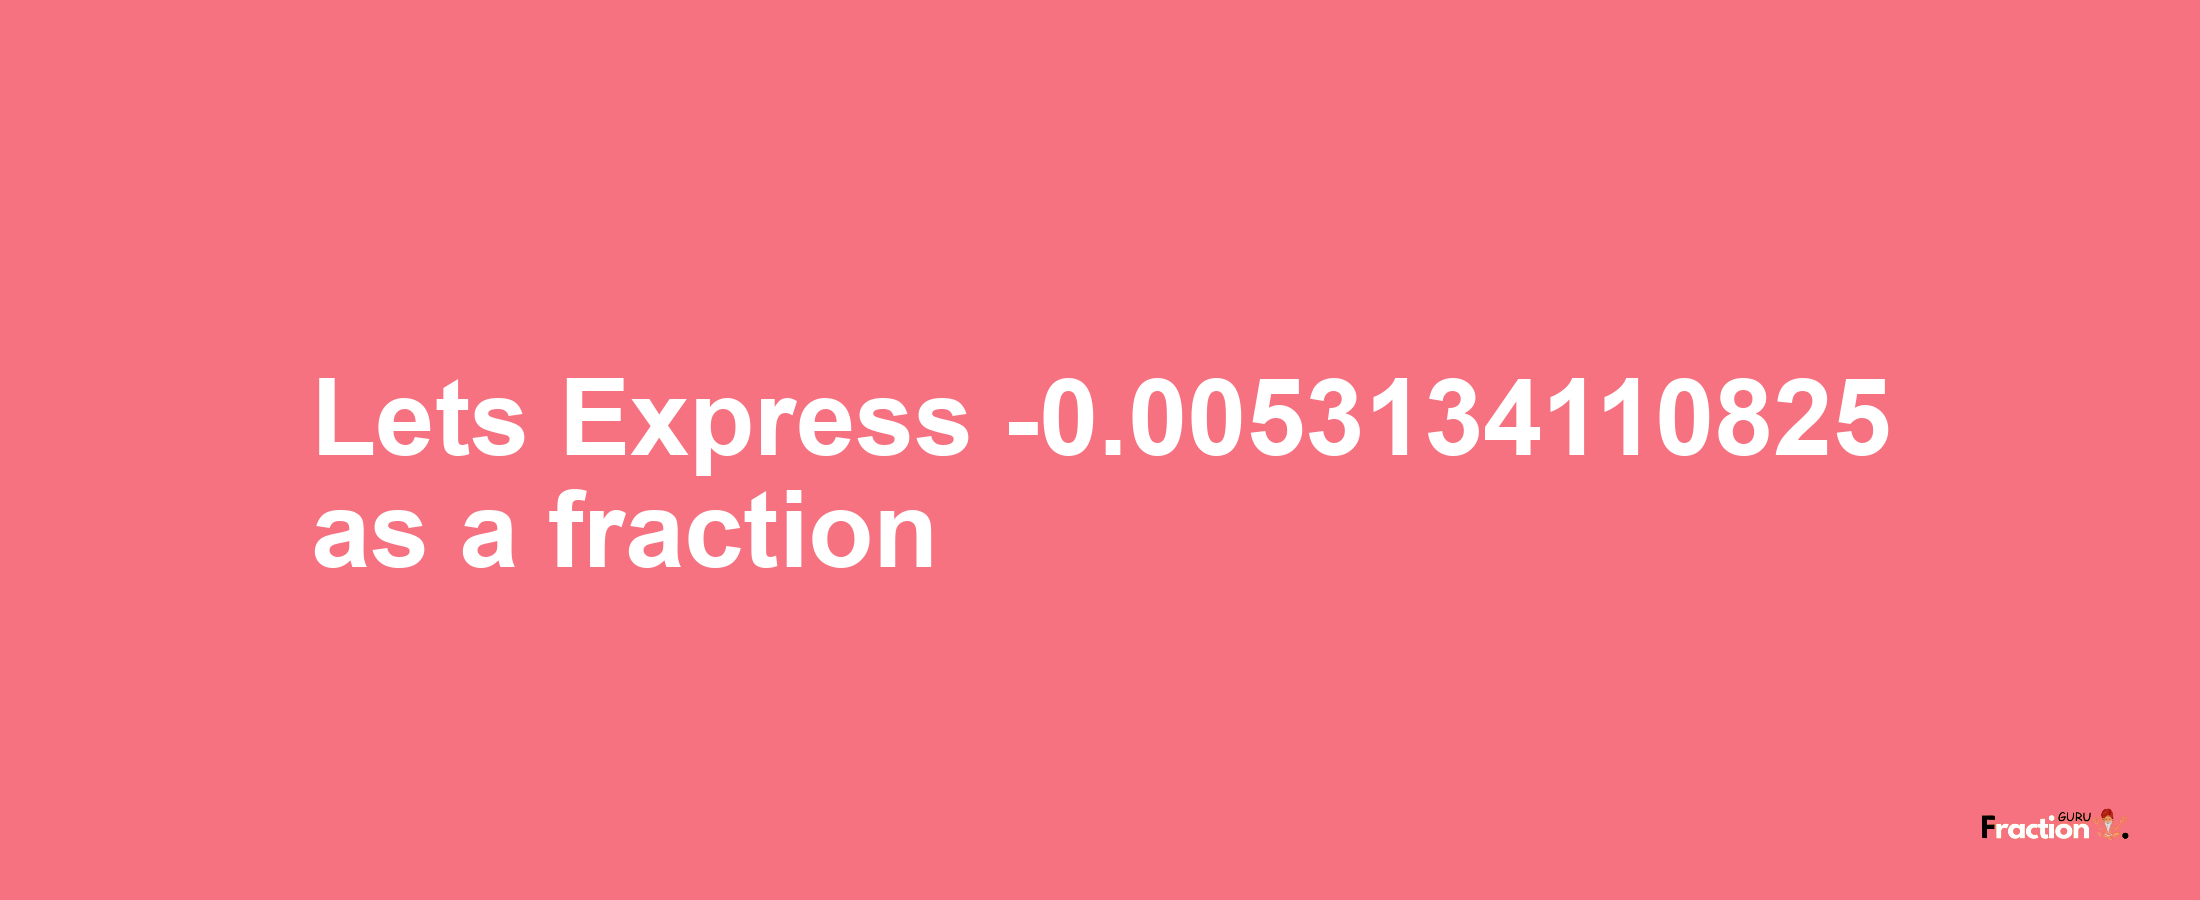 Lets Express -0.0053134110825 as afraction